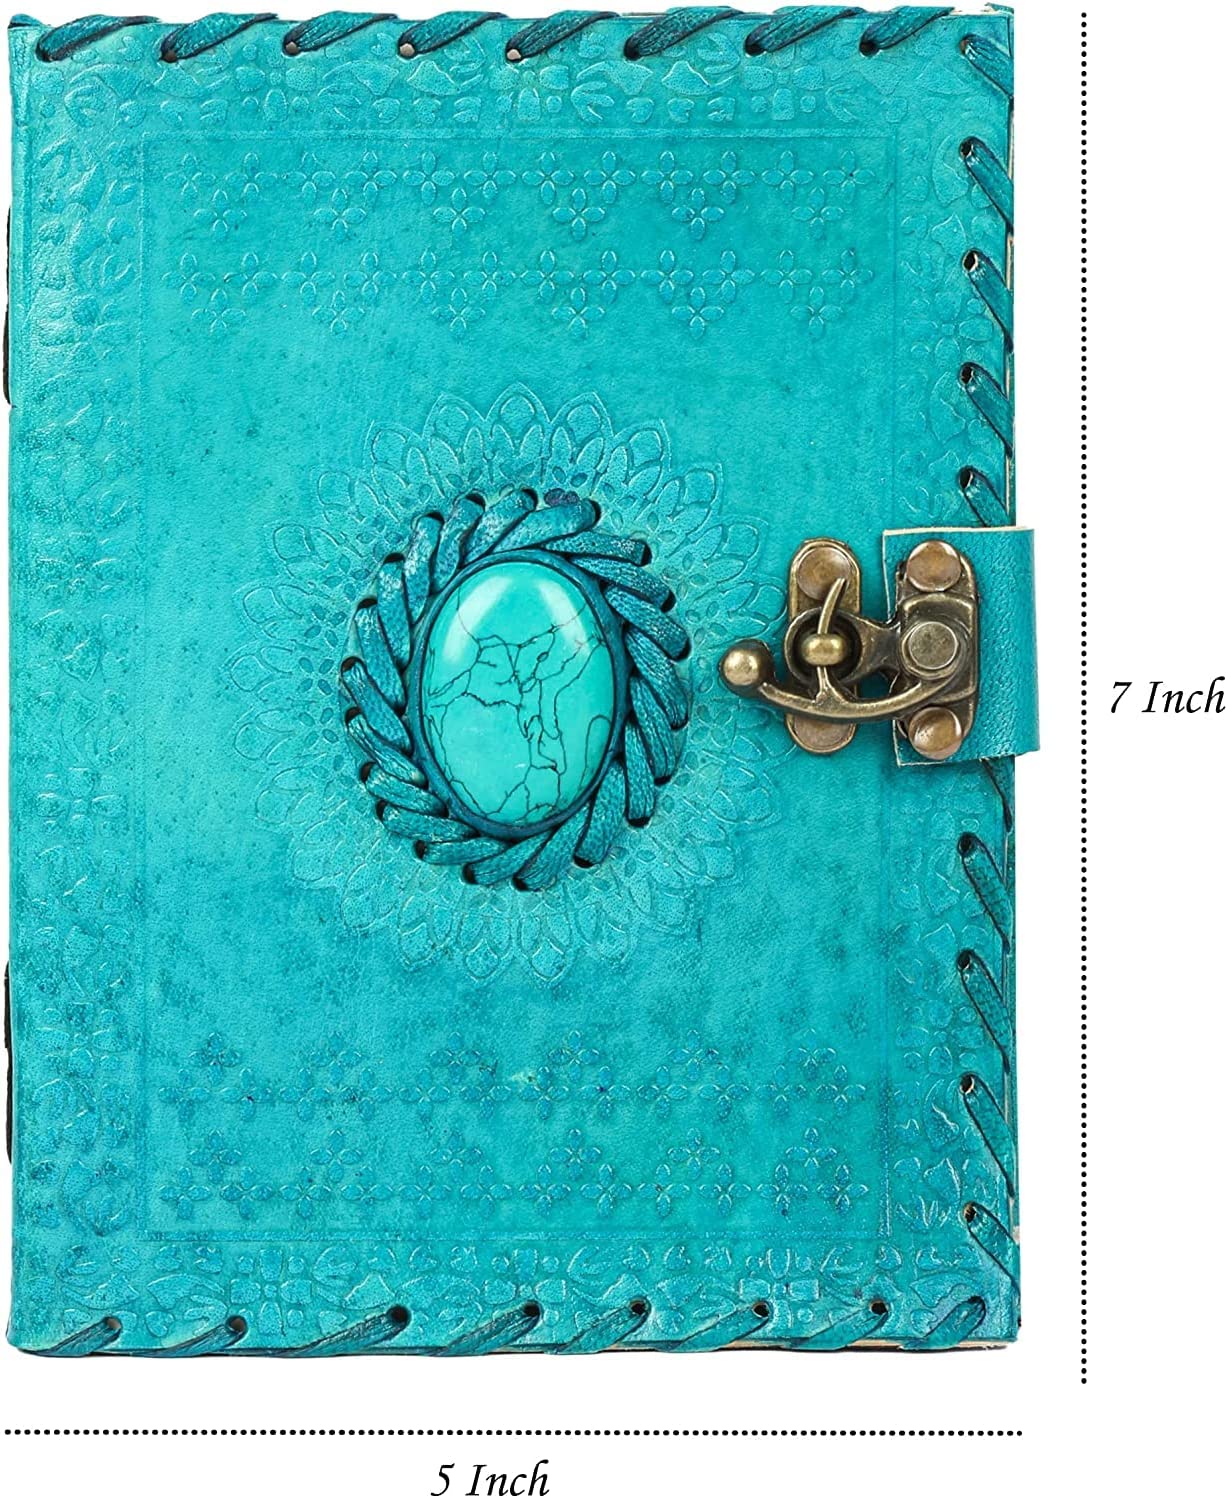 Leather Journals – Blank Spell Book of Shadows Journal with Lock Clasp Prop Vintage Notebook Journal Leather Bound Journal Witchcraft Wiccan Notebook Leather Sketchbook Drawing & Writing Book Diary - image 4 of 5